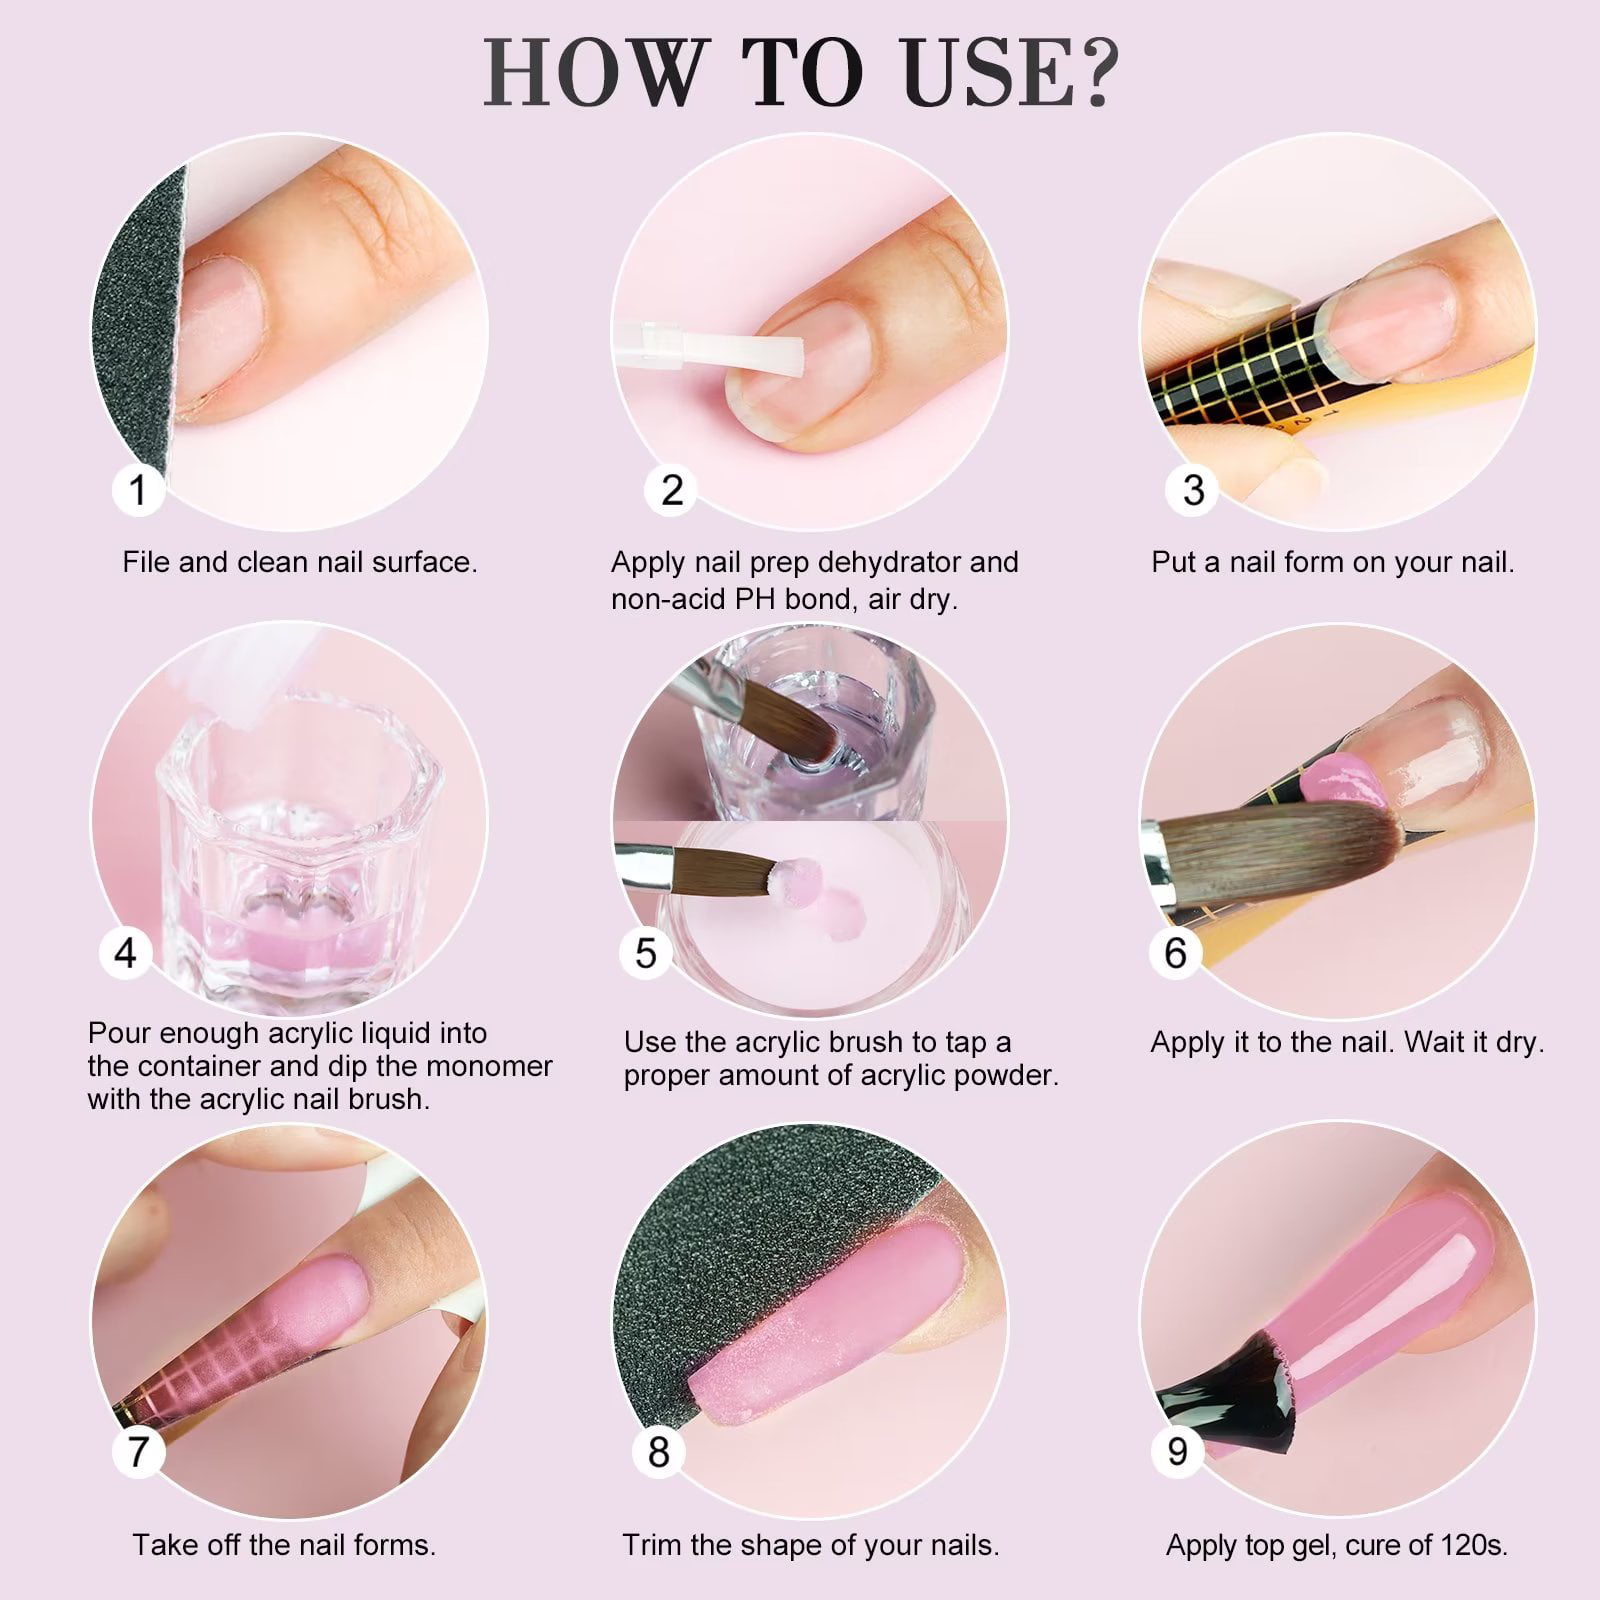 What Can You Use Instead of Monomer for Acrylic Nails? – Fairy Glamor